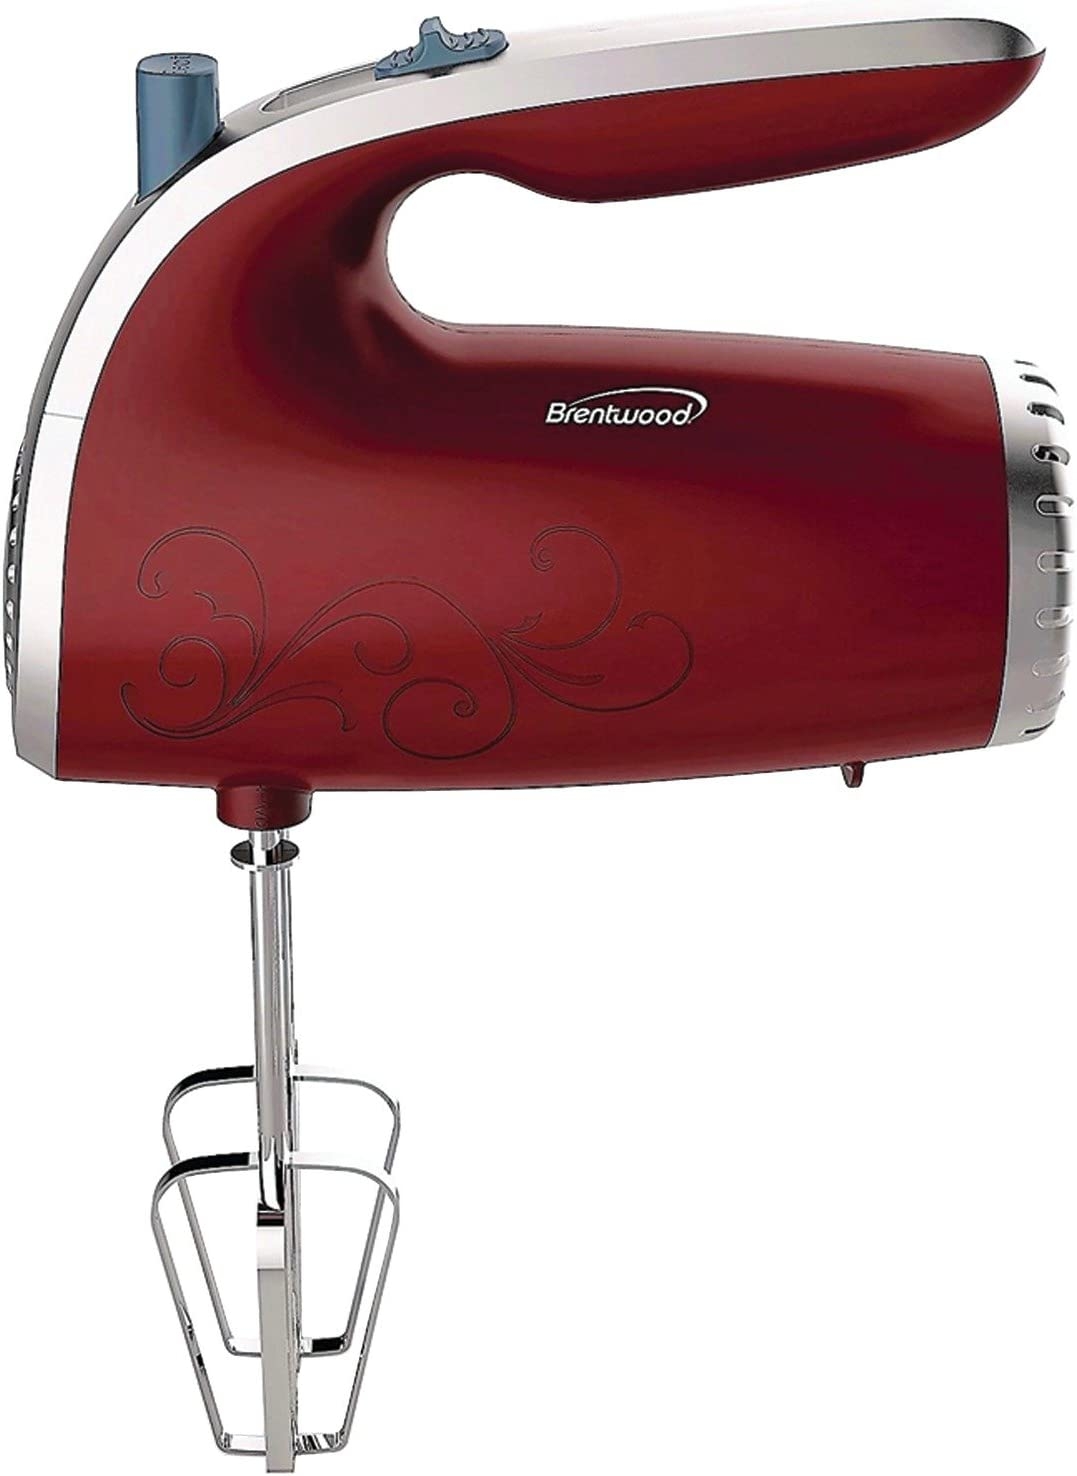 Brentwood Electric Hand Mixer, Red Import To Shop ×Product customization General Description Gallery Reviews Variations